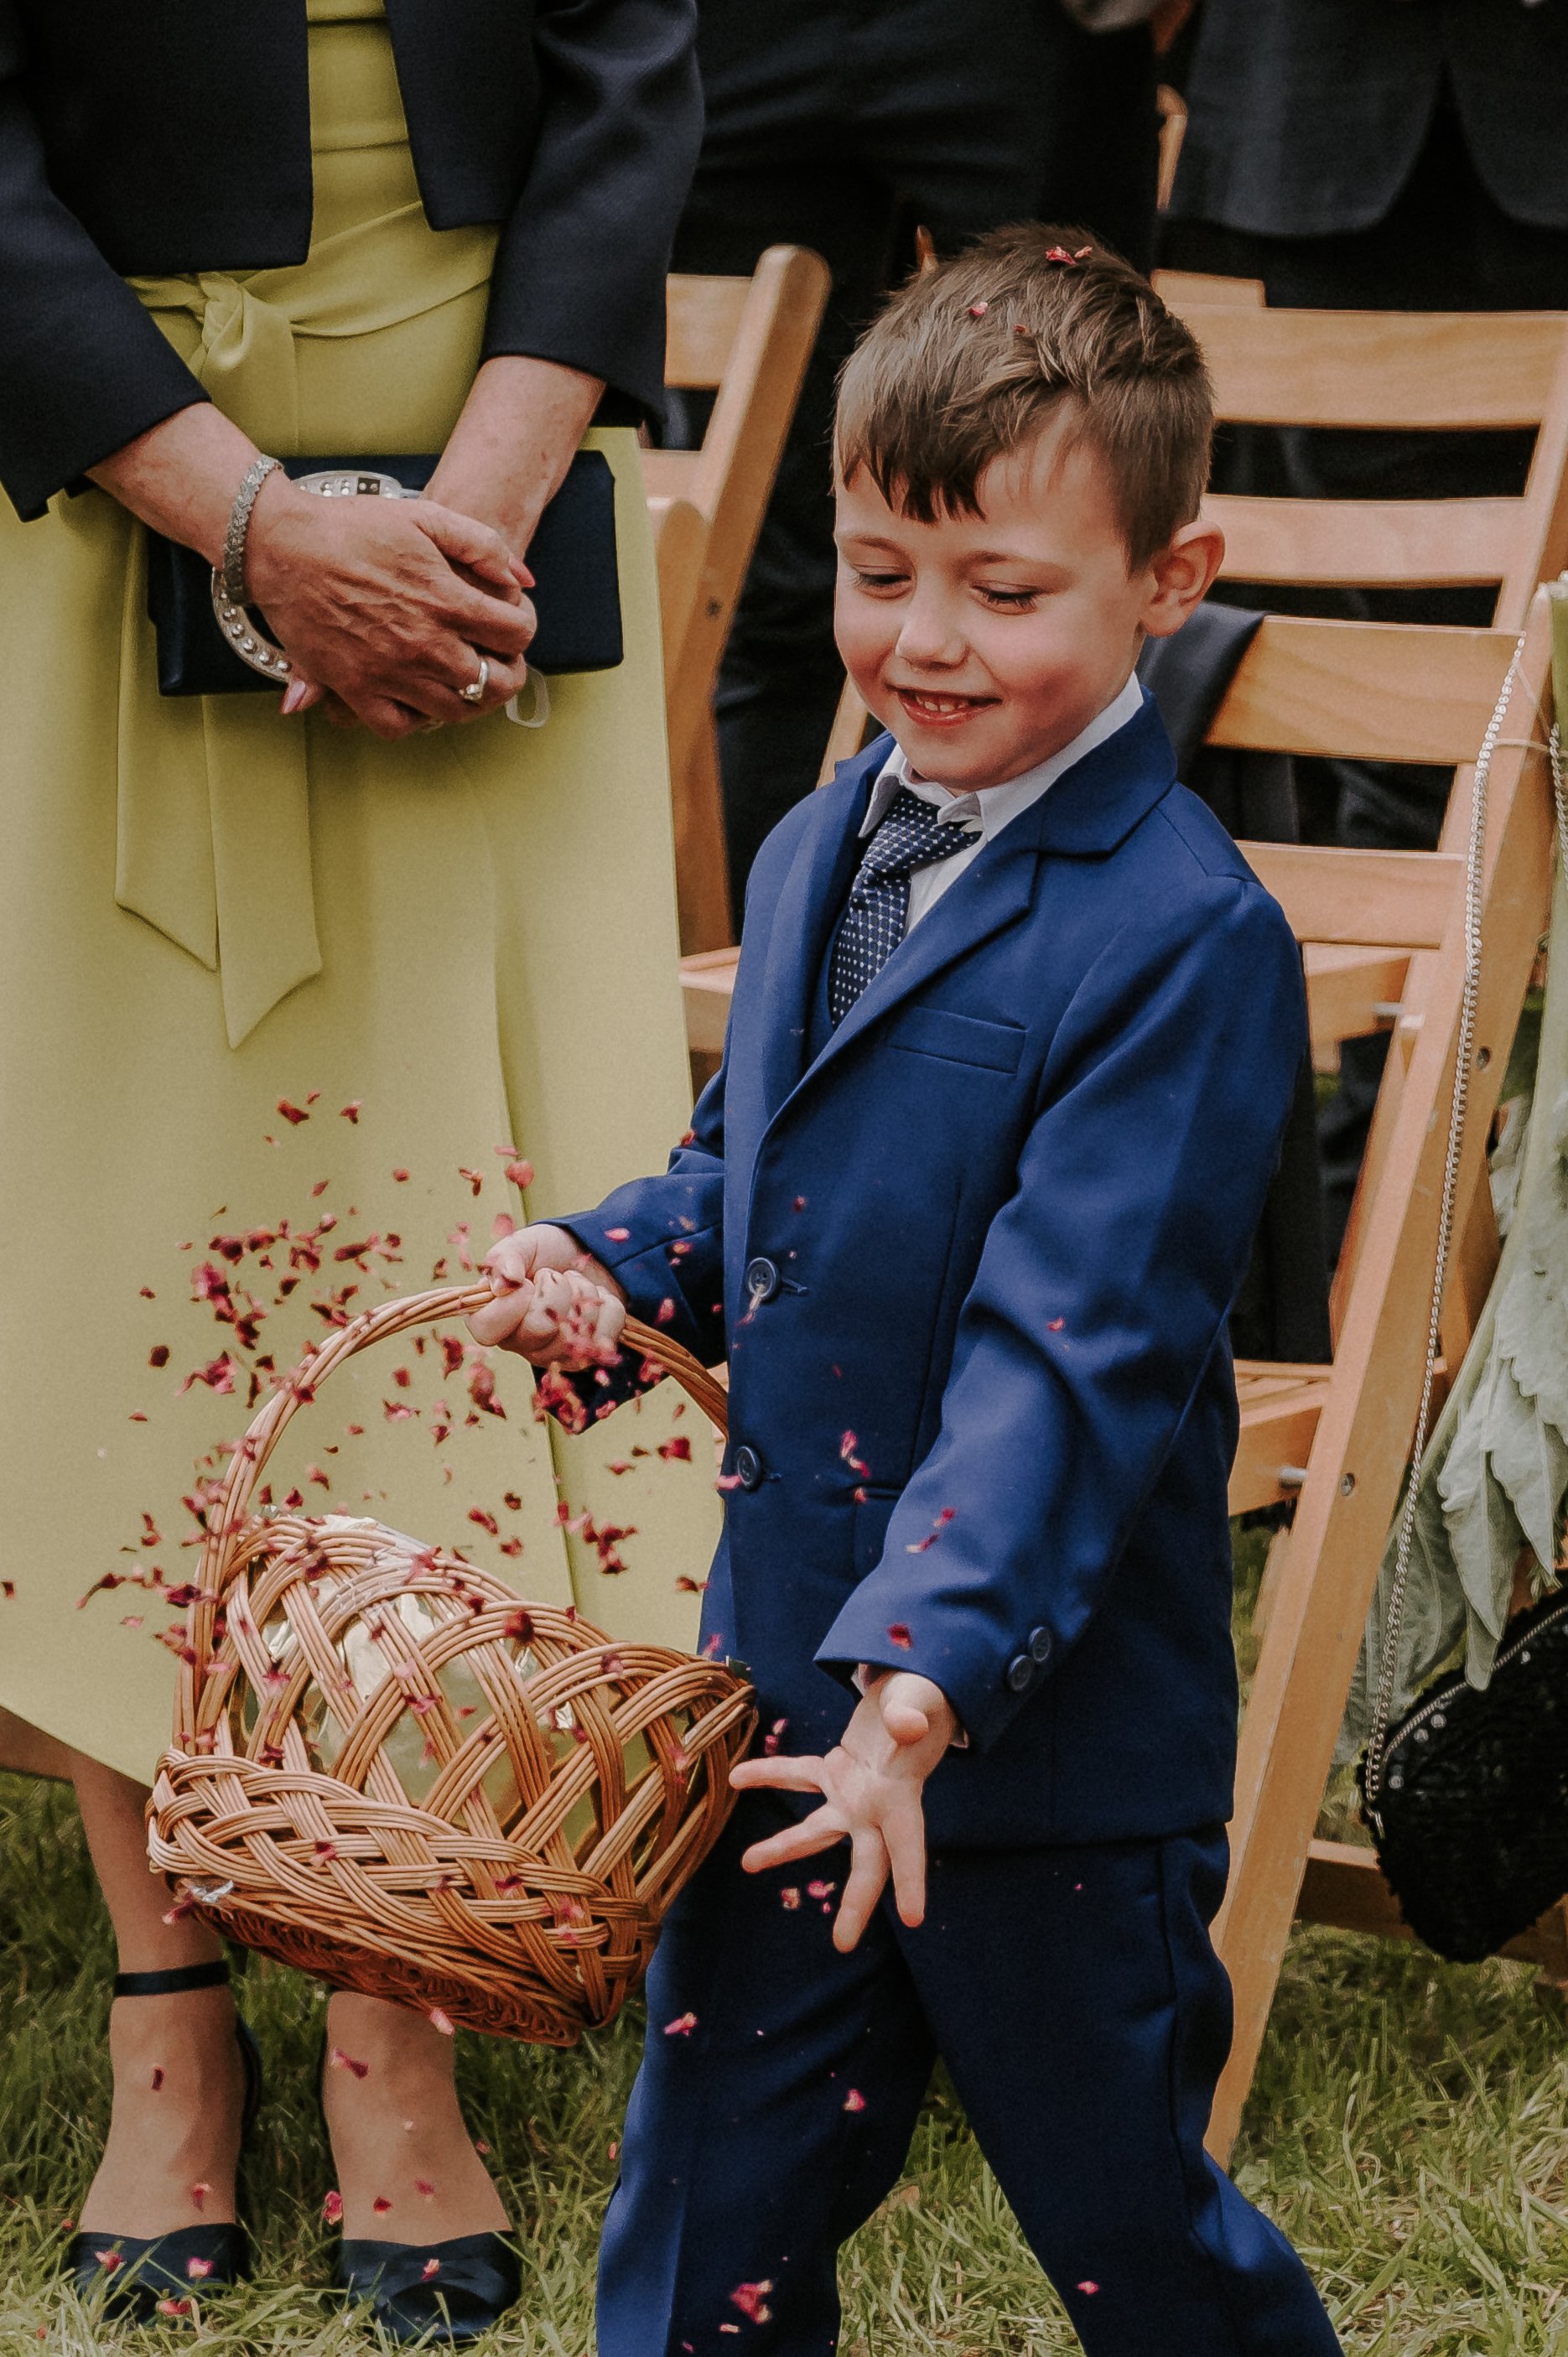 A Sweet Little Pageboy Proudly Spreads Rose Petals Down a Vintage Rug-Lined Aisle ahead of the Bridal Procession at Happy Valley Norfolk